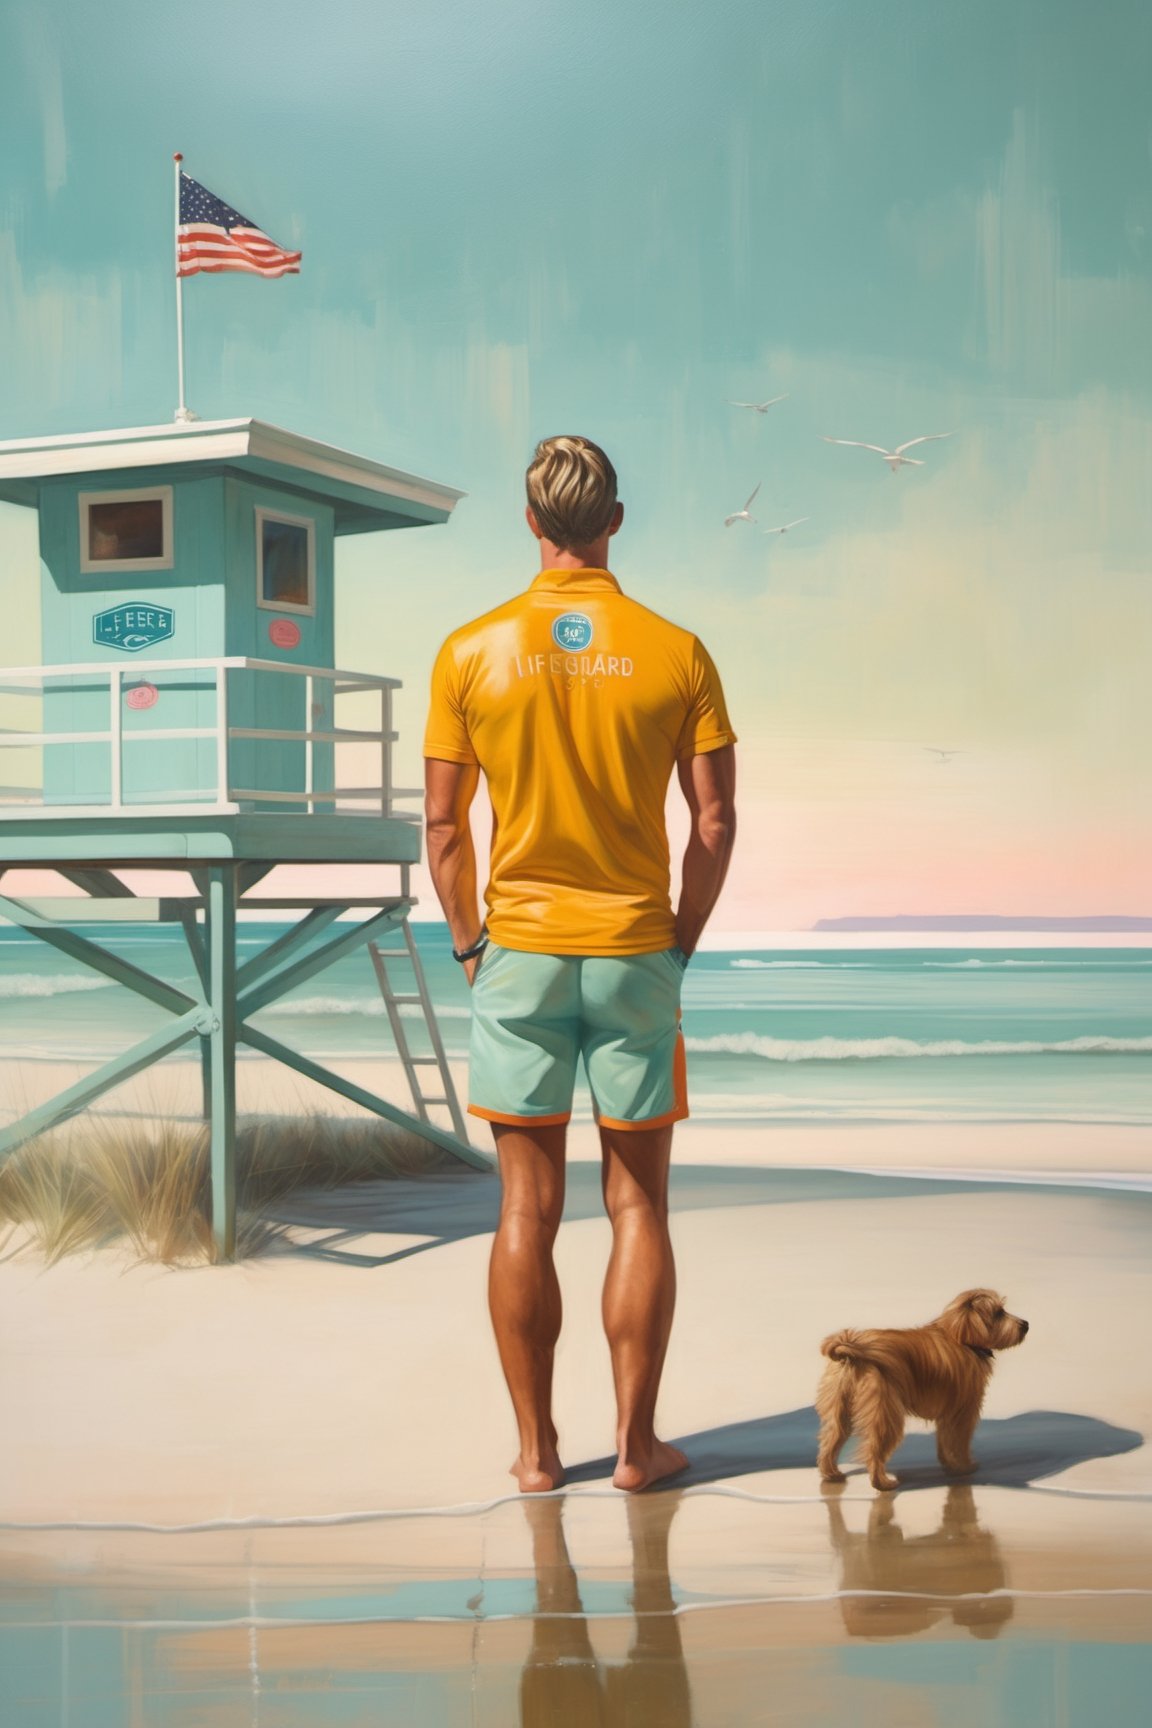 painting of my favorite handsome lifeguard, powerful detailing, in the background there is natural morning light 
intricate details, hazy, mellow, pastel hues, romantic, shabby-chic, artwork by oliver jeffers, jane newland   